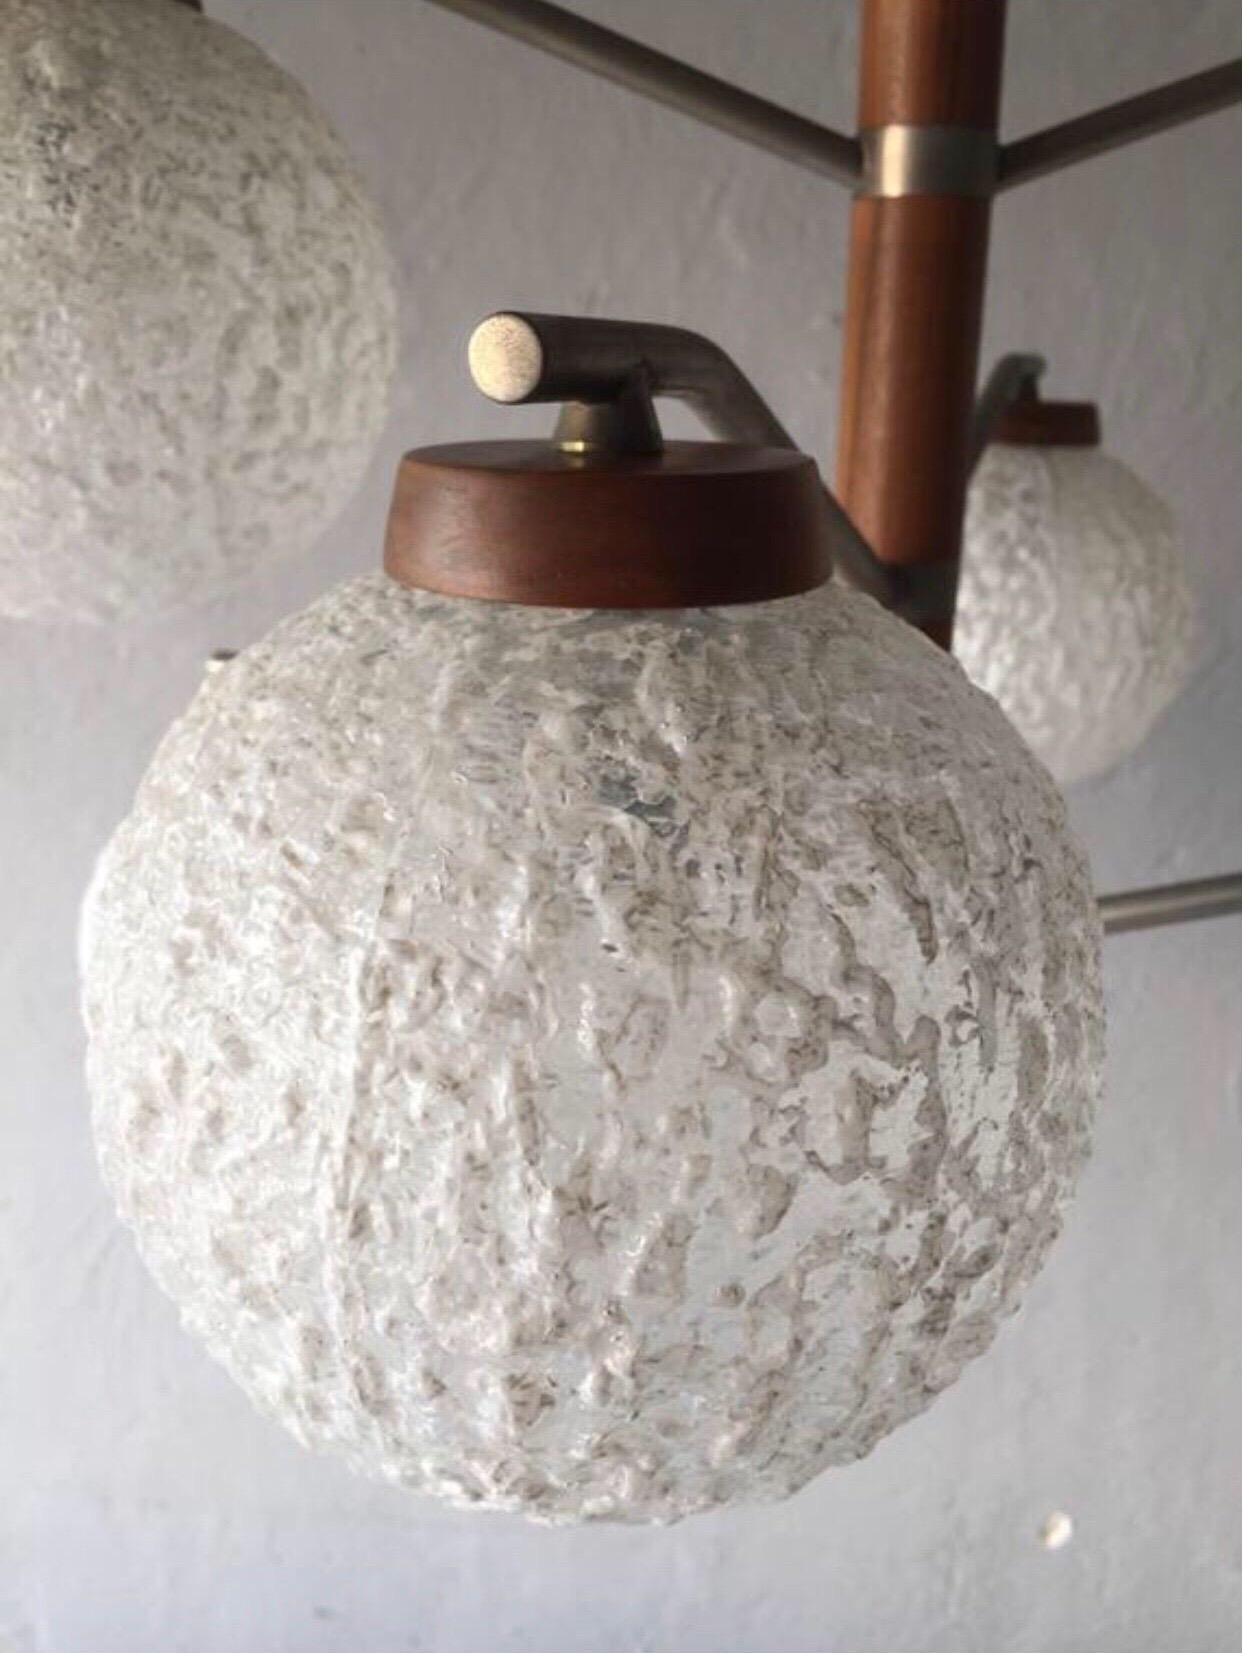 Mid-20th Century Temde 6 Armed Crinkly Ball Glass Ceiling Lamp, Teak Chandelier, 1960s Germany For Sale